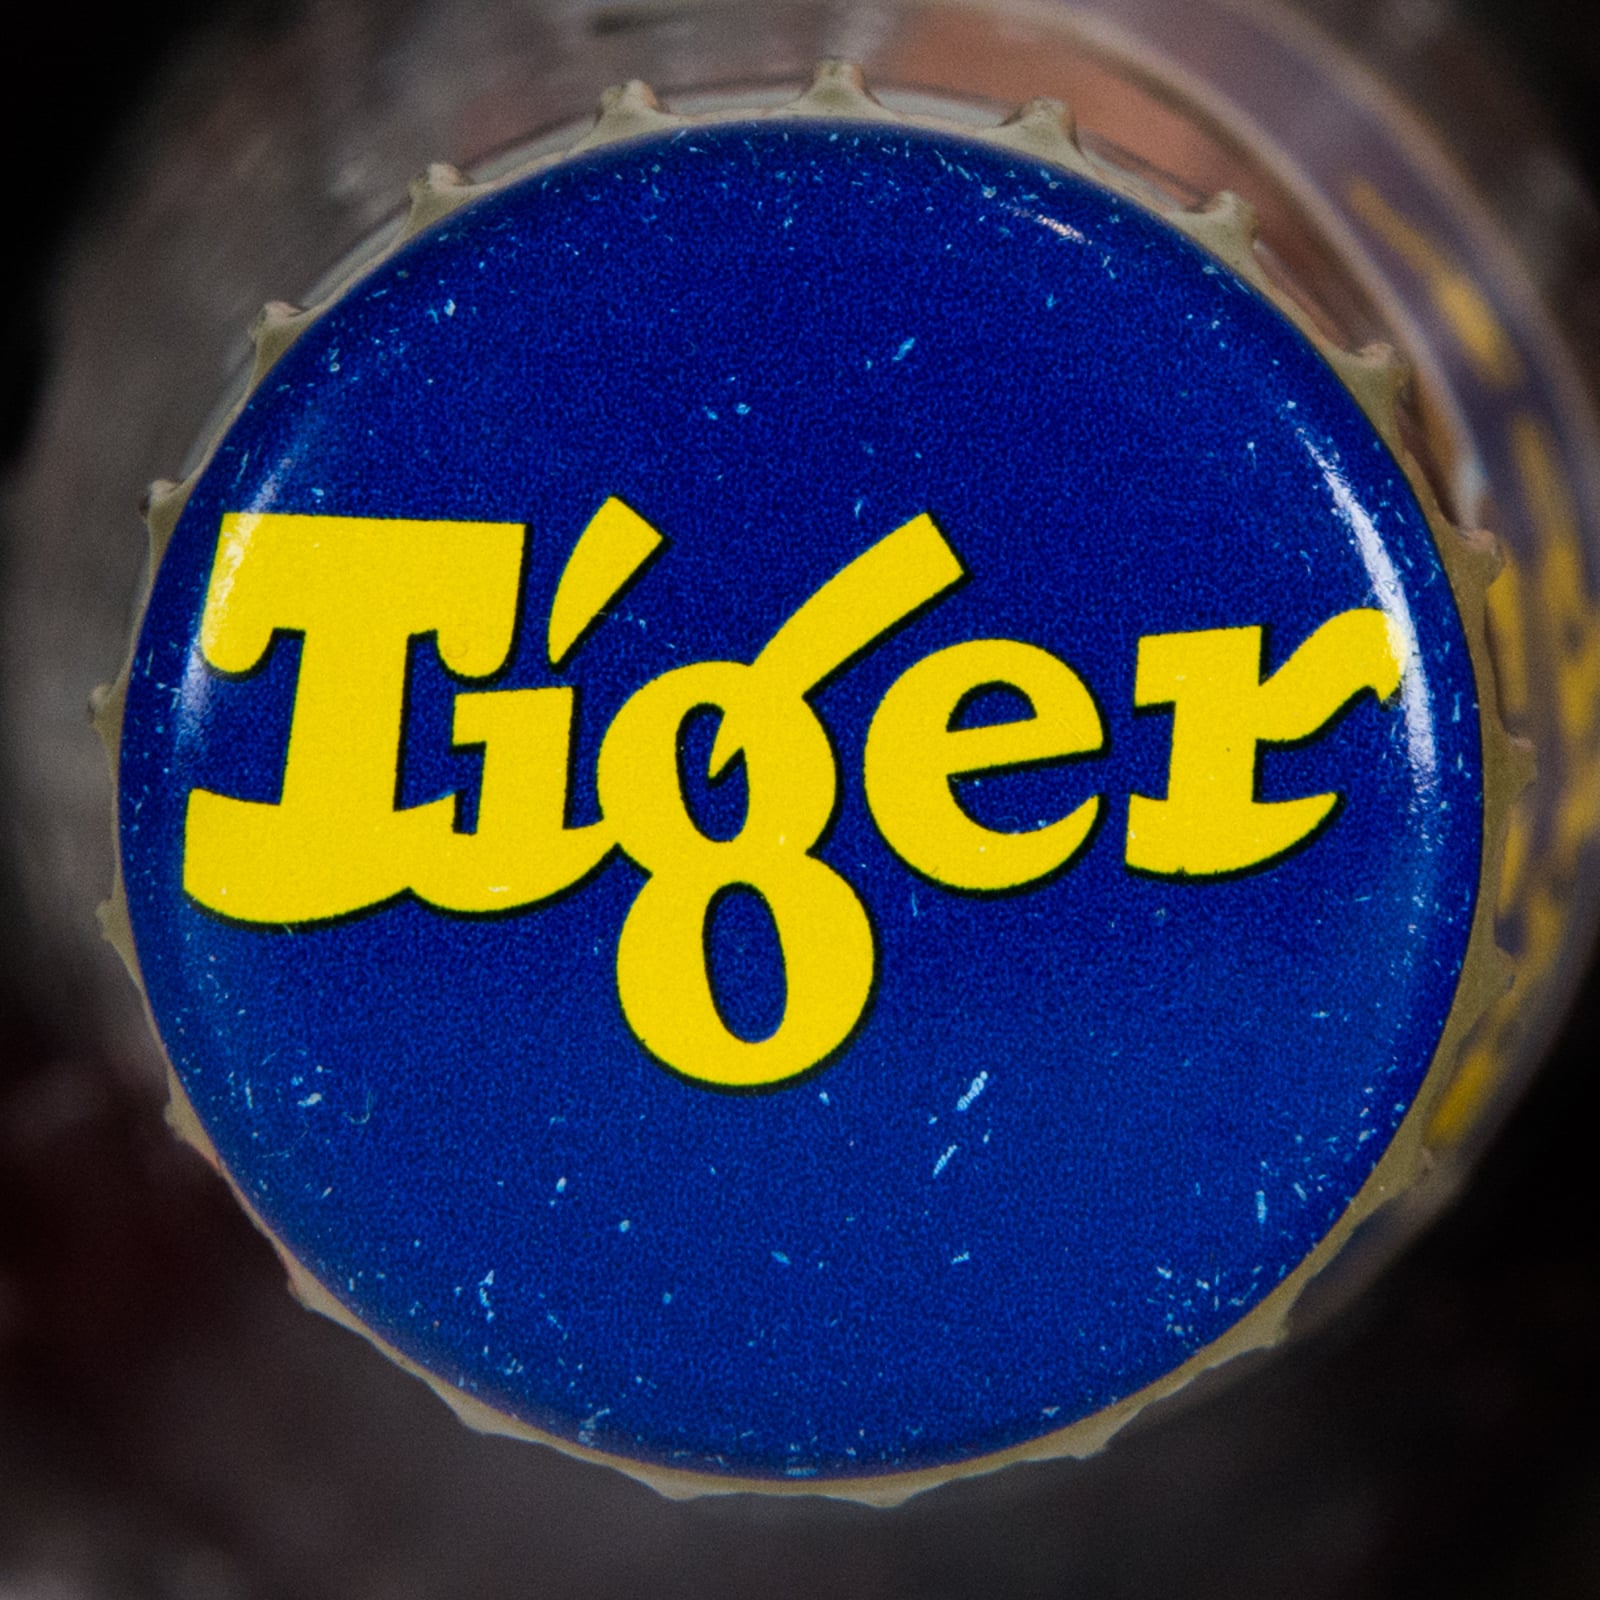 Tiger Limited Edition Replica of 1965 Vintage Bottle, 633 ml